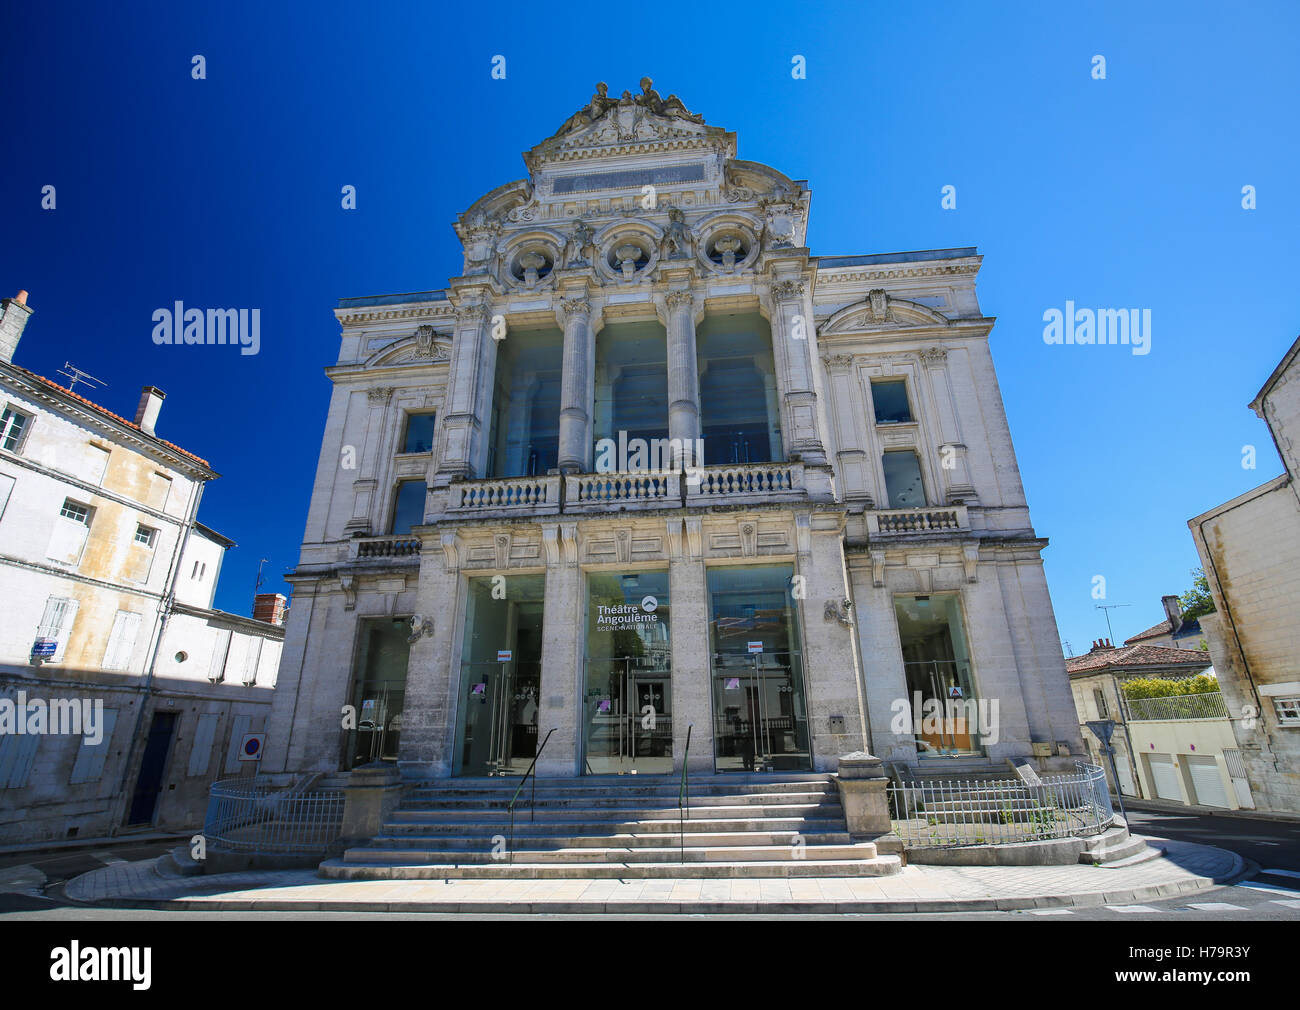 Theater building of Angouleme, capital of the Charente department in France. Stock Photo